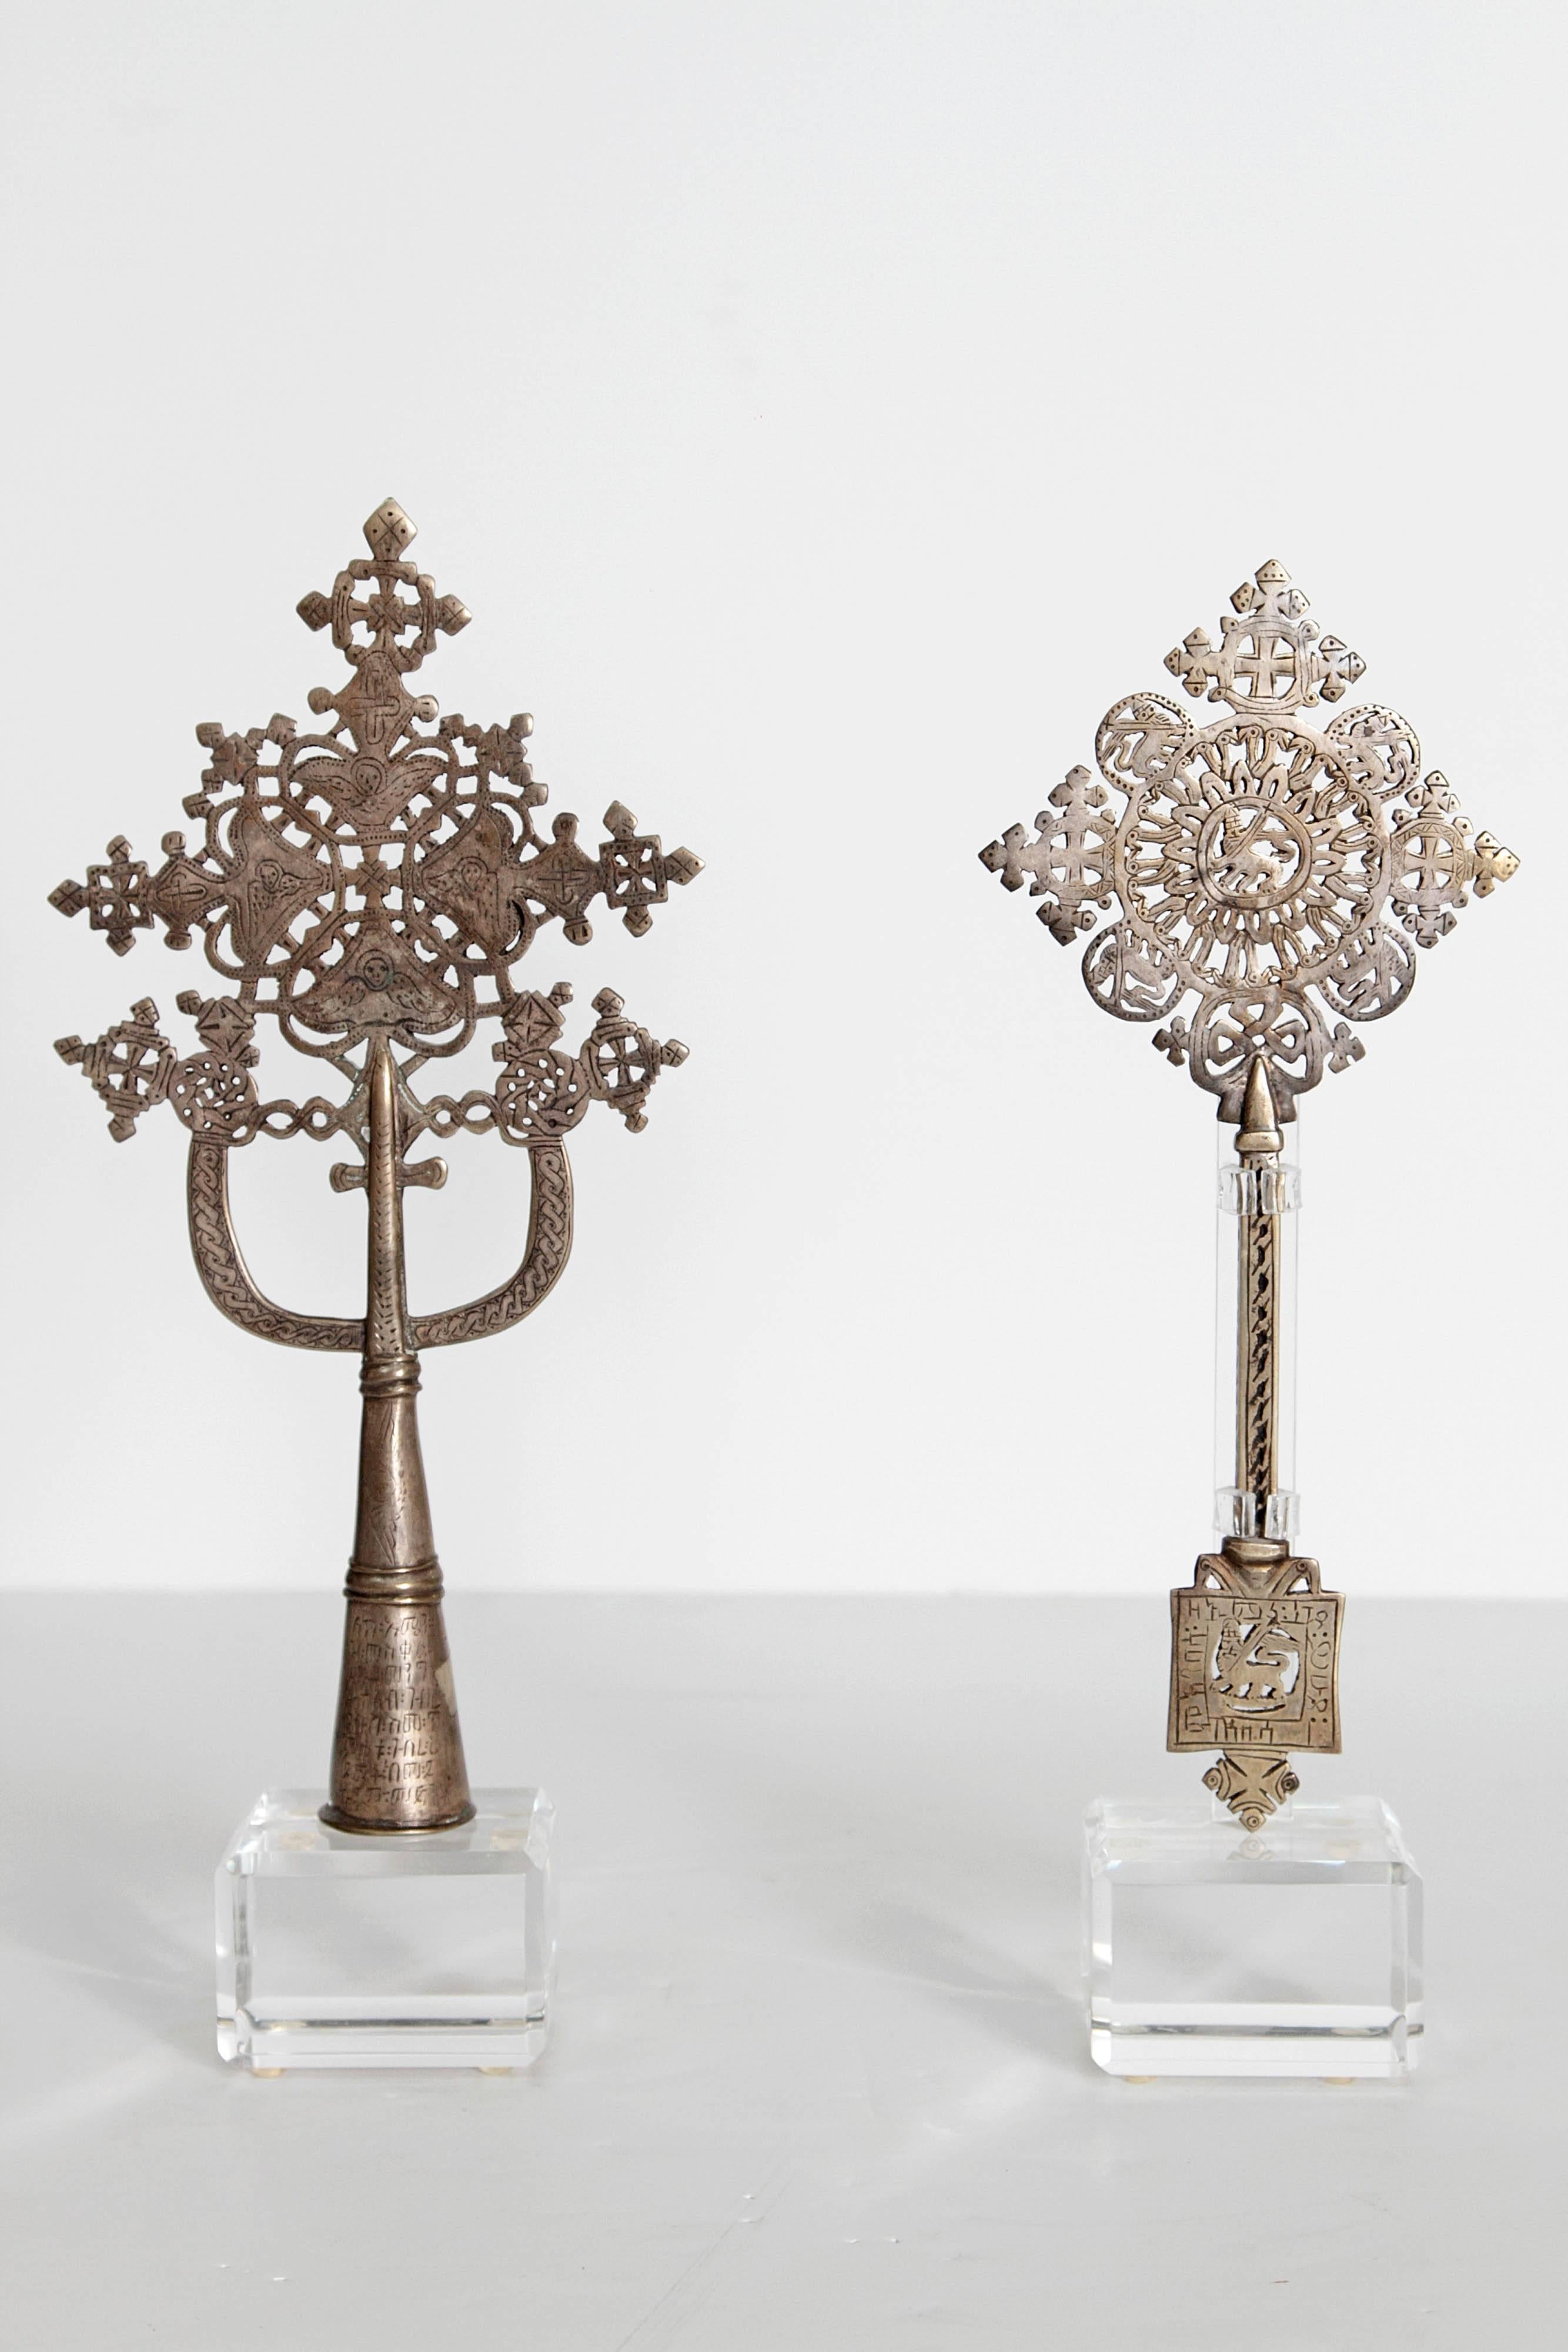 Ethiopian Silver Coptic Processional Crosses from Ethiopia with Custom Lucite Stands